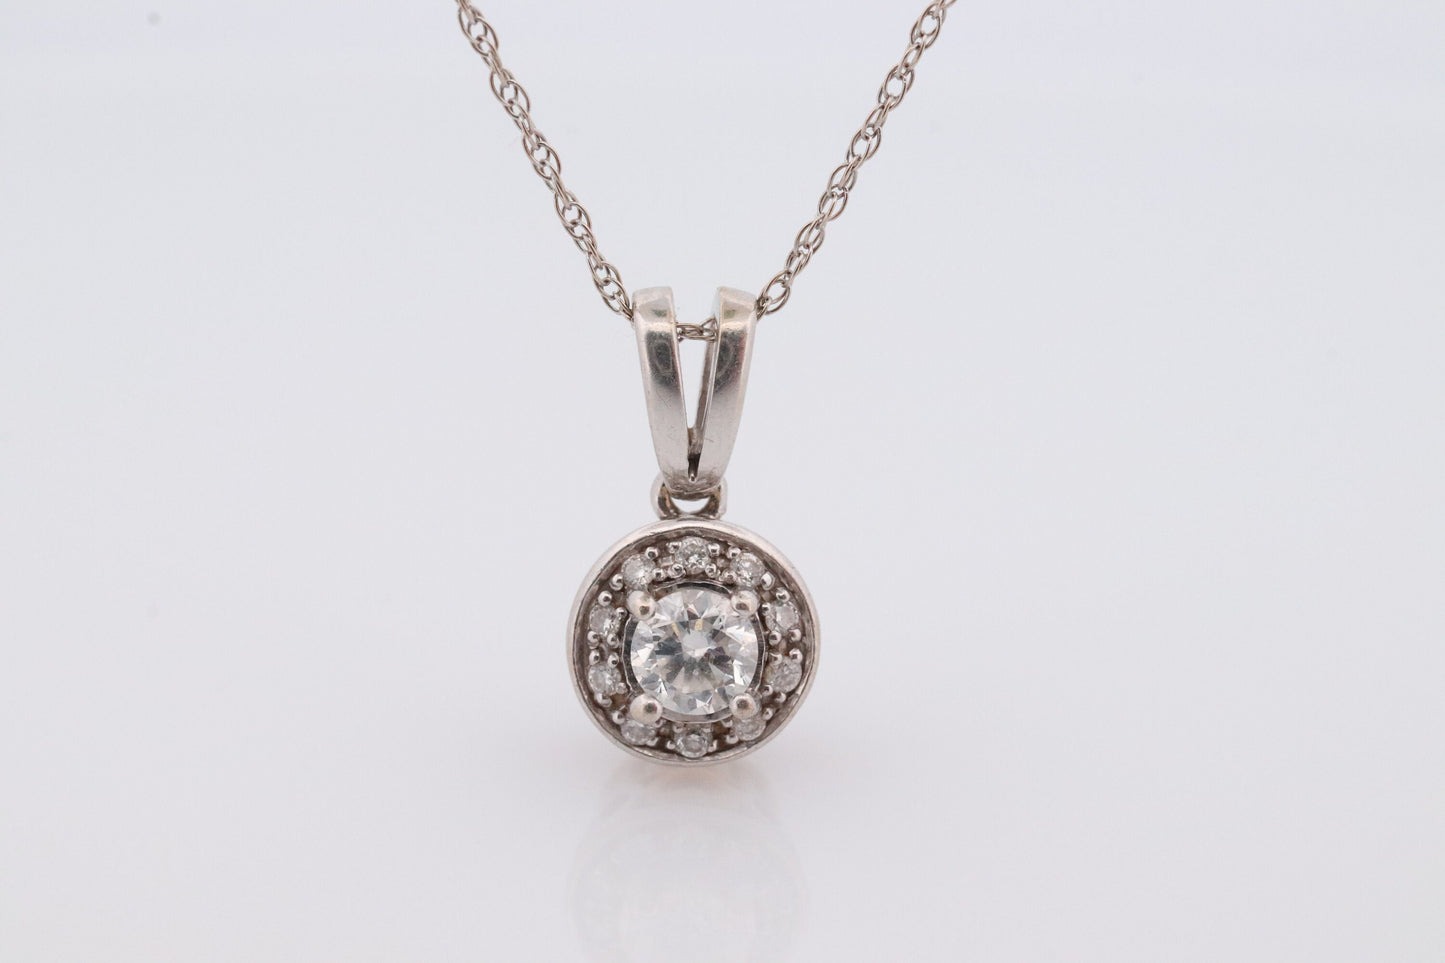 14k Diamond Solitaire Halo Pendant. 14k White gold and 24K Yellow Gold Inlay Canister Pendant. Singapore chain necklace.